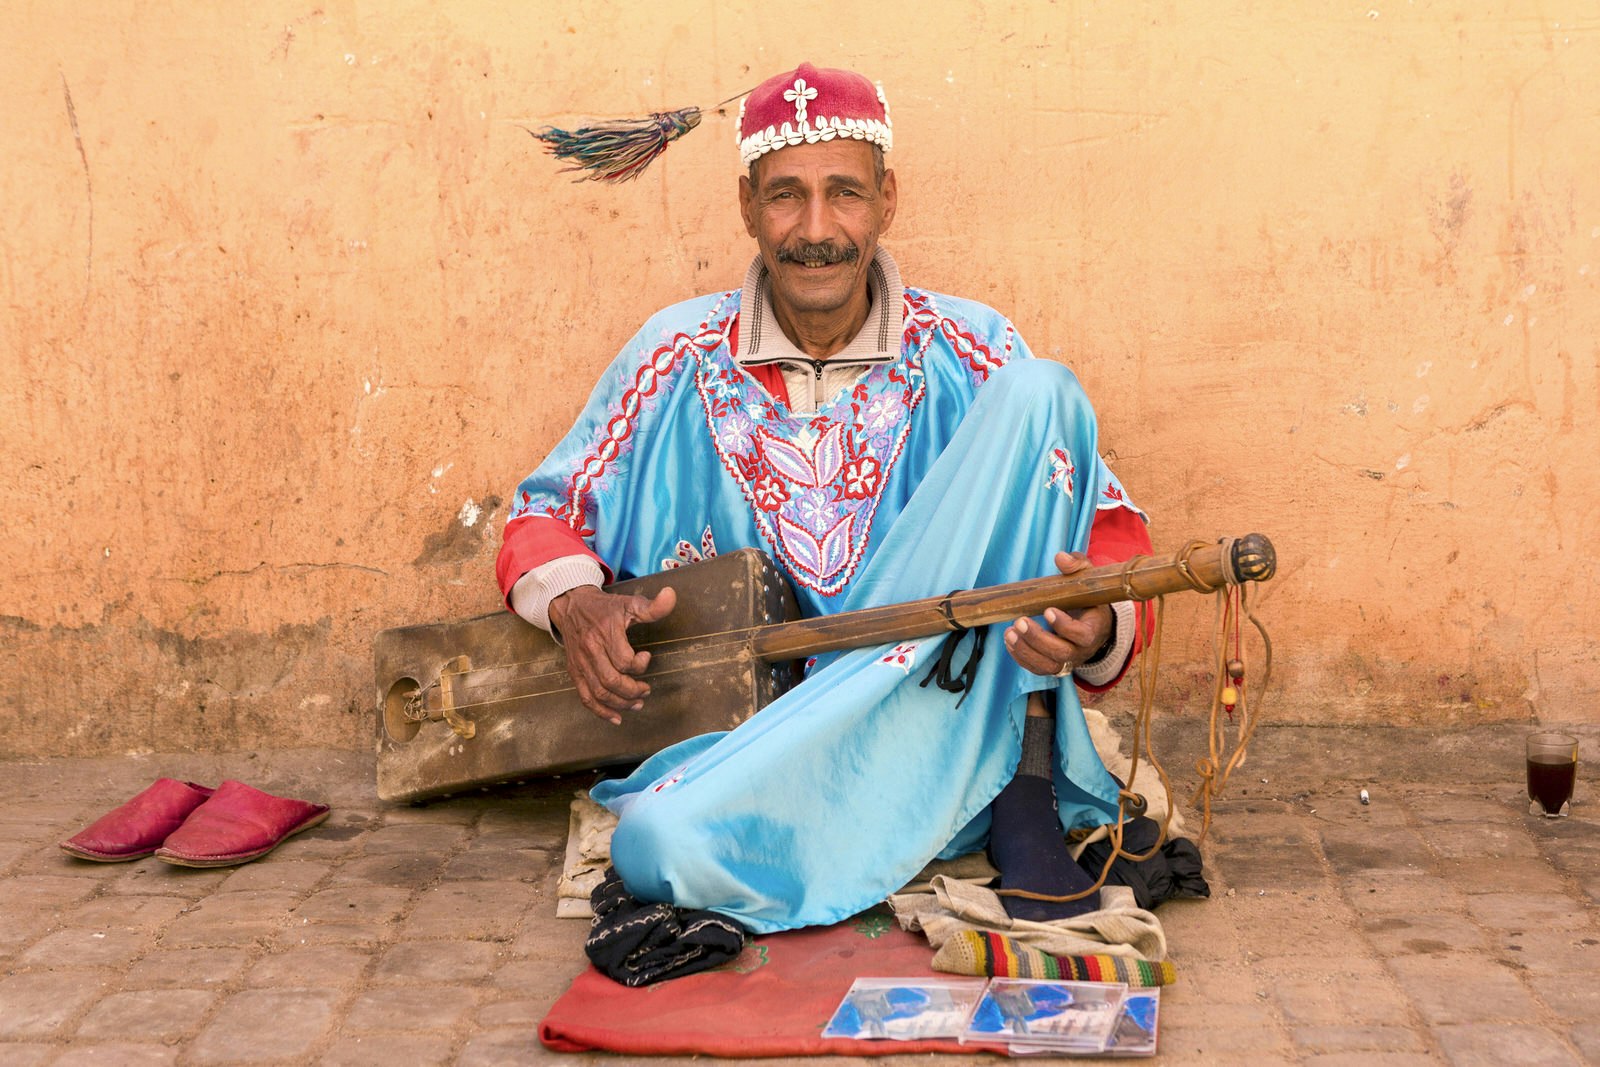 Gnaoua musician, Morocco © Chris Griffiths / Lonely Planet